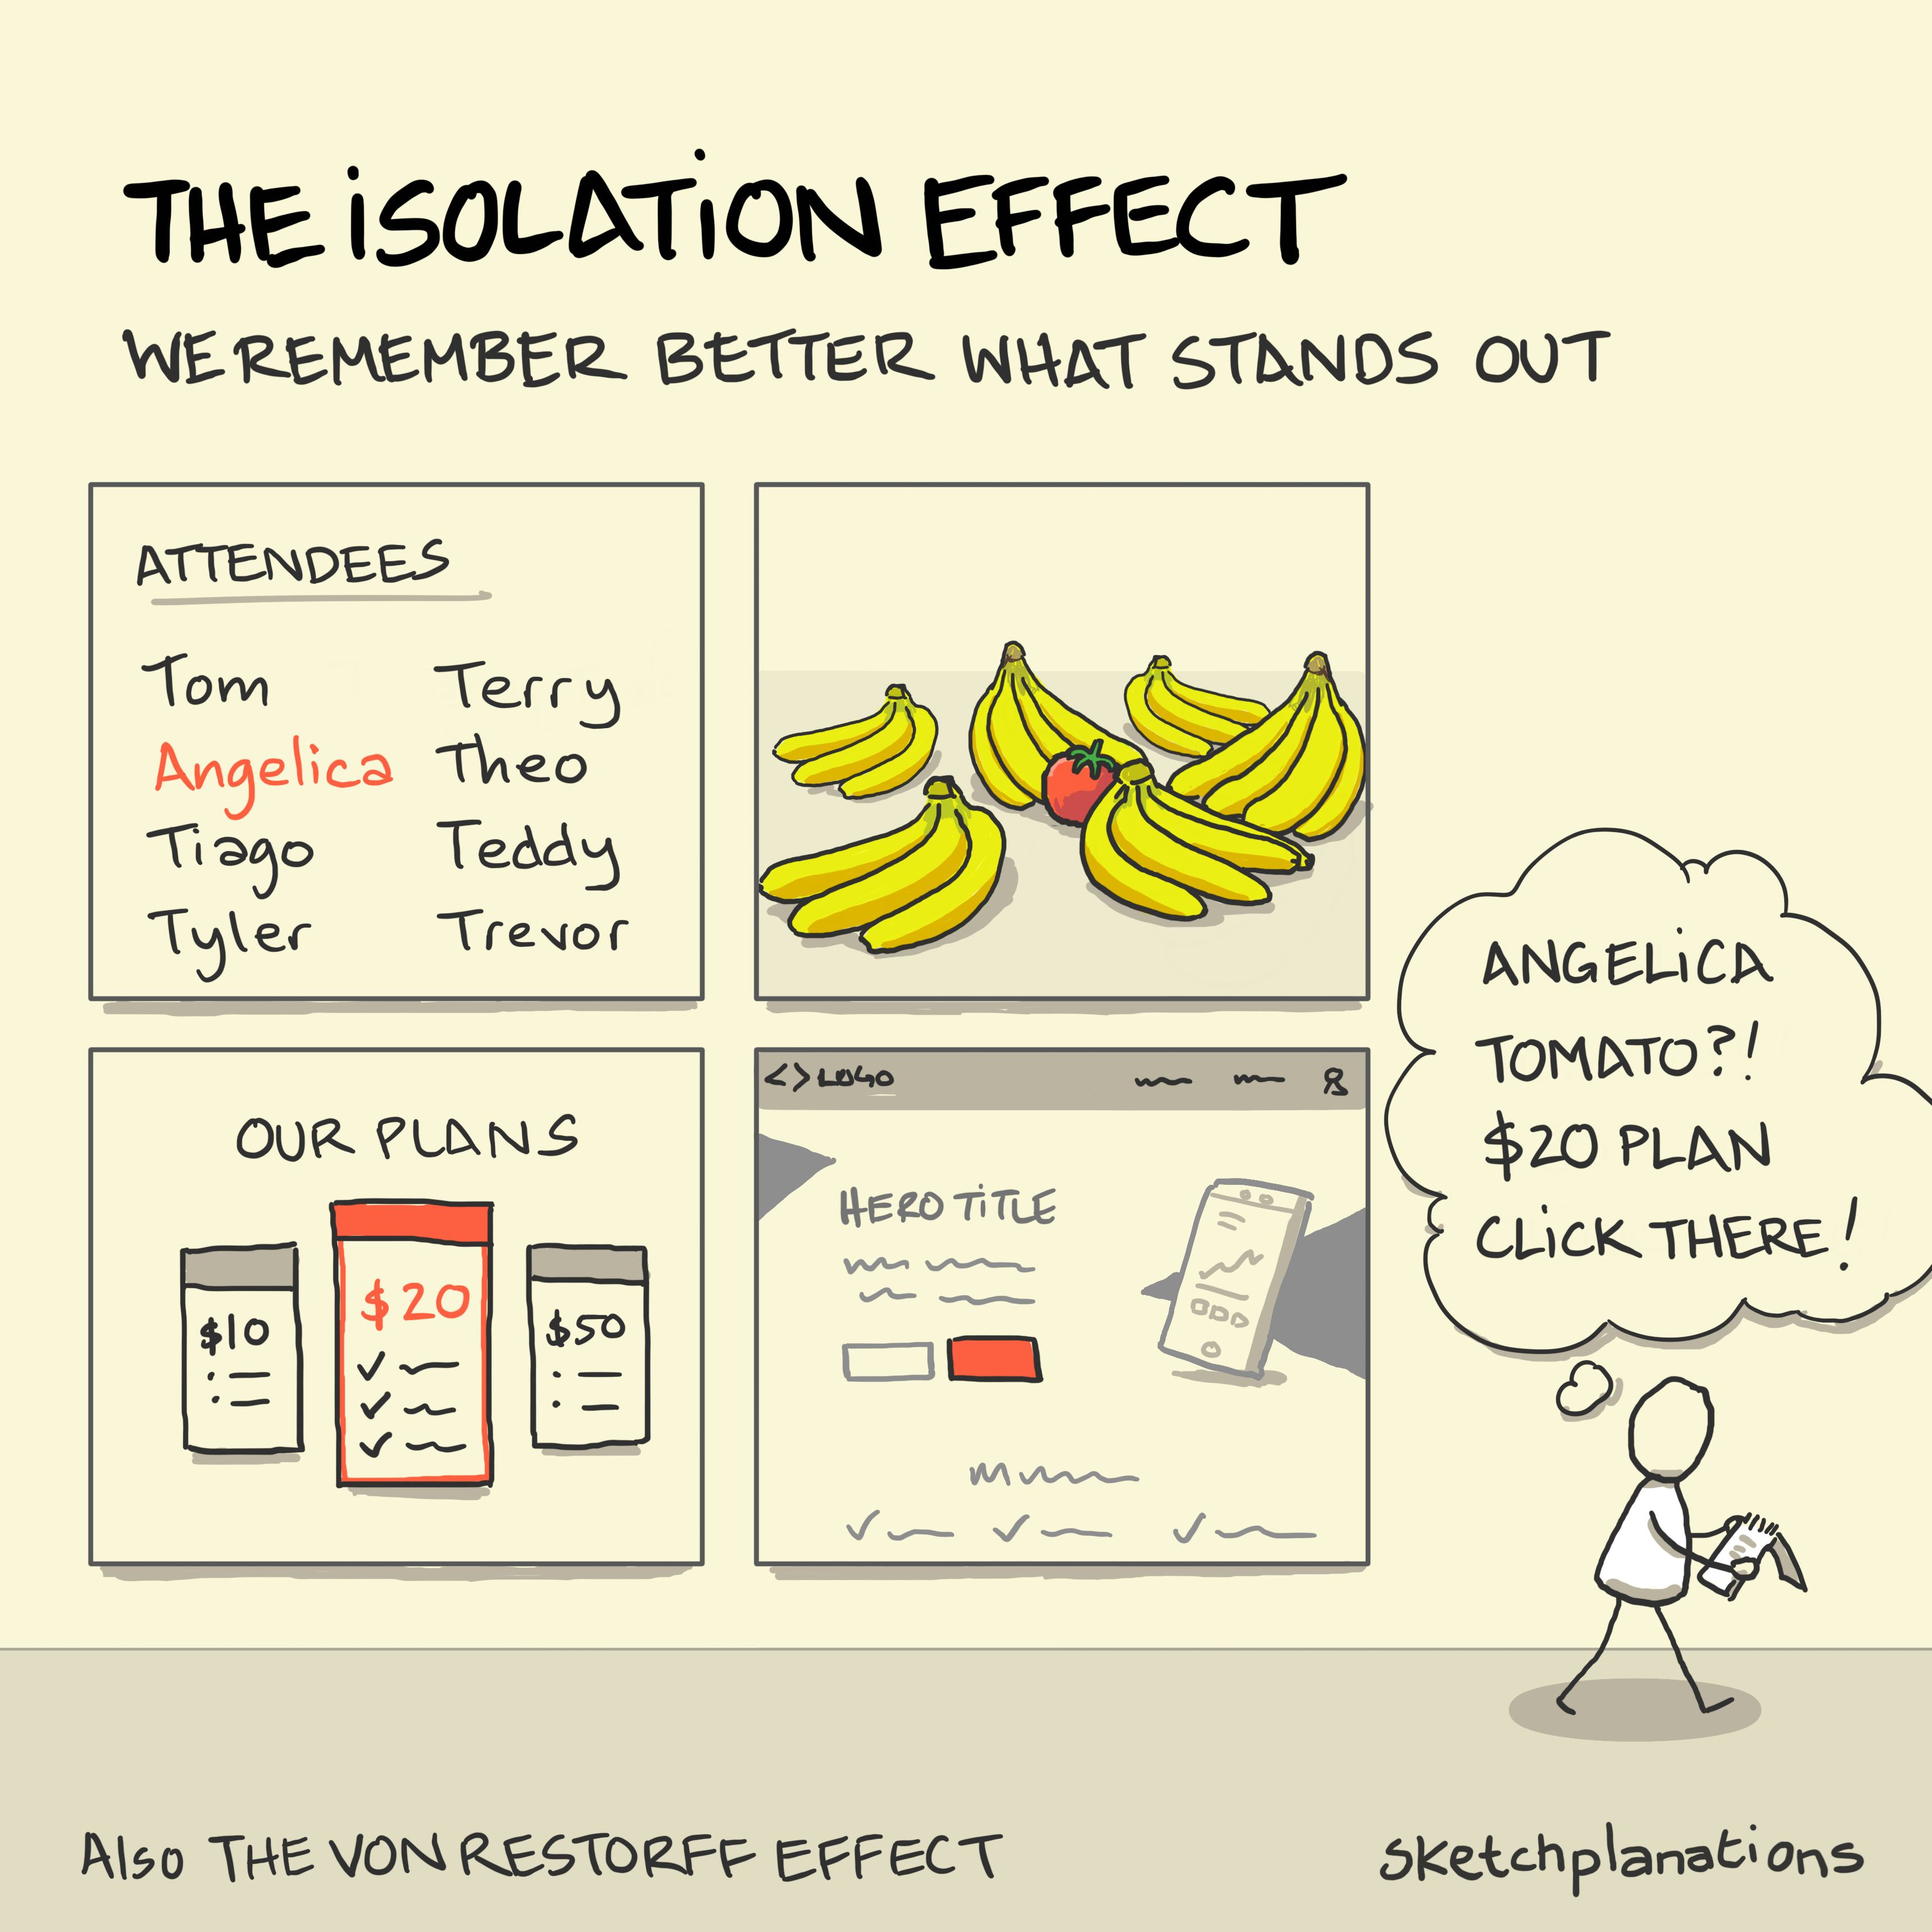 The isolation effect: remembering better what stands out from a set of otherwise like items in a set. Also known as the Von Restorff effect